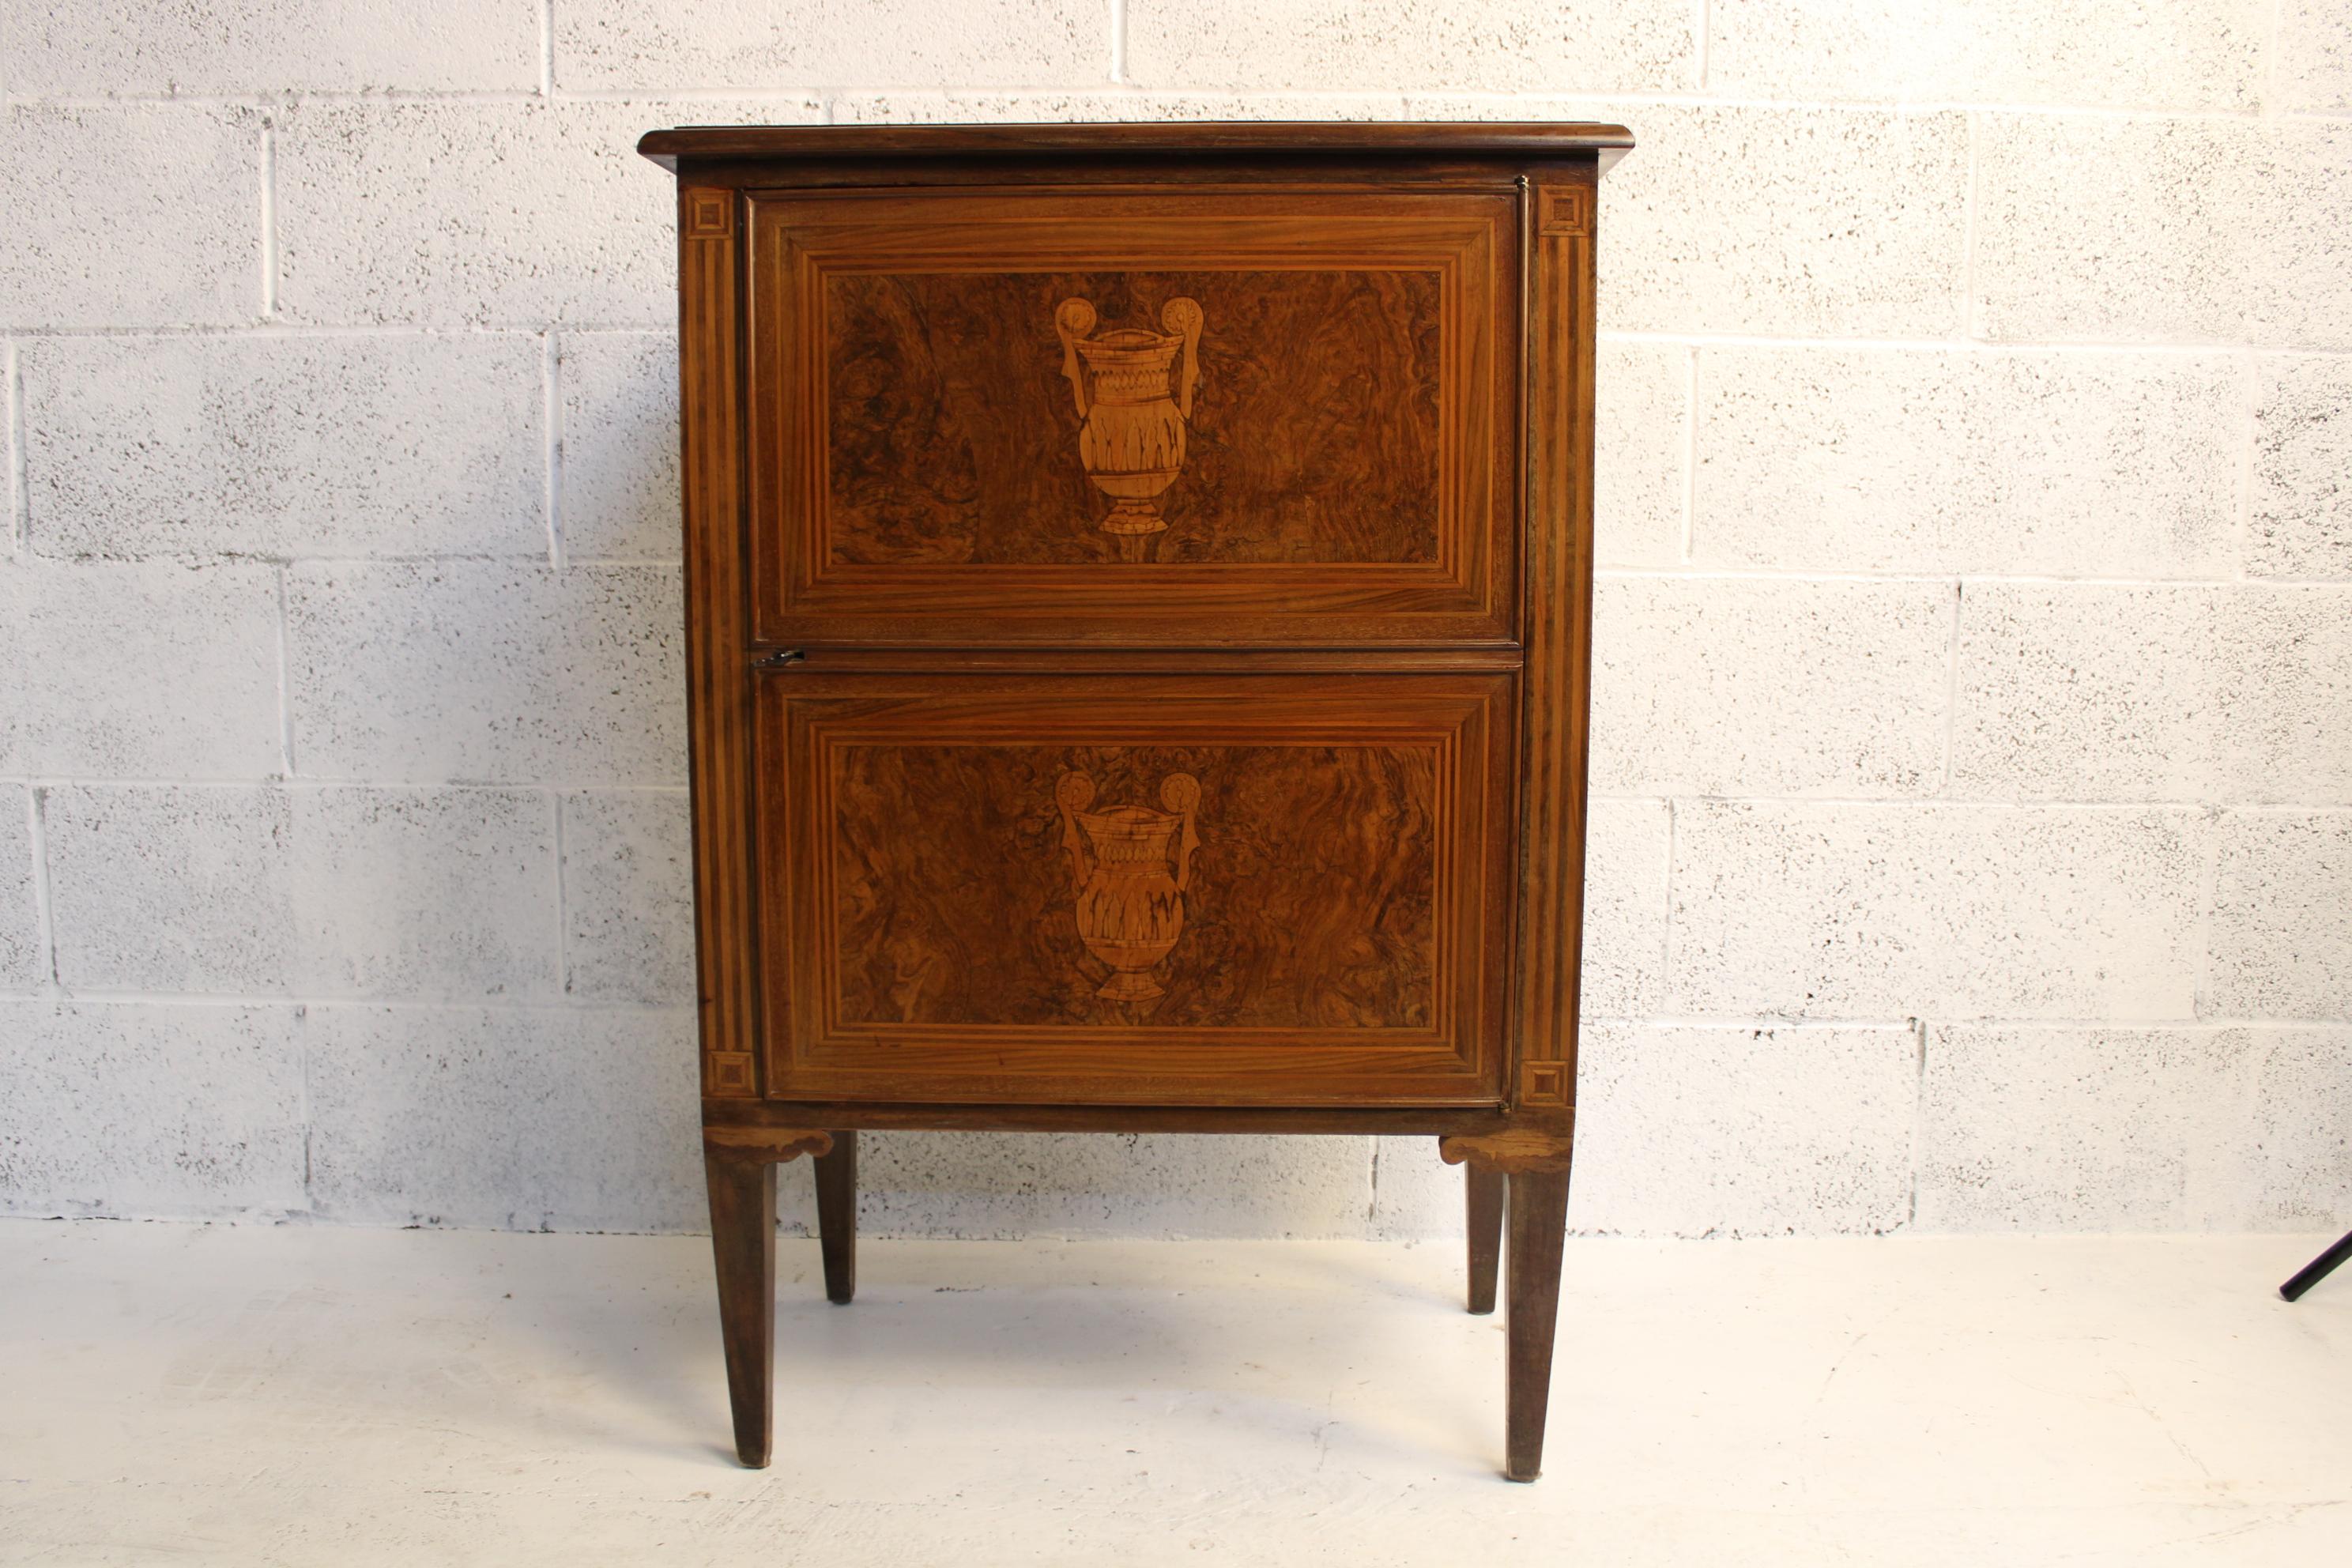 Louis XVI Style Marquetry Side Commode, French Side Commode, Cabinet with one door in inlaid wood in Louis XVI style. Sideboard in walnut, Furniture equipped internally with a flatter base shelf, of good capacity and service. Sideboard supported by